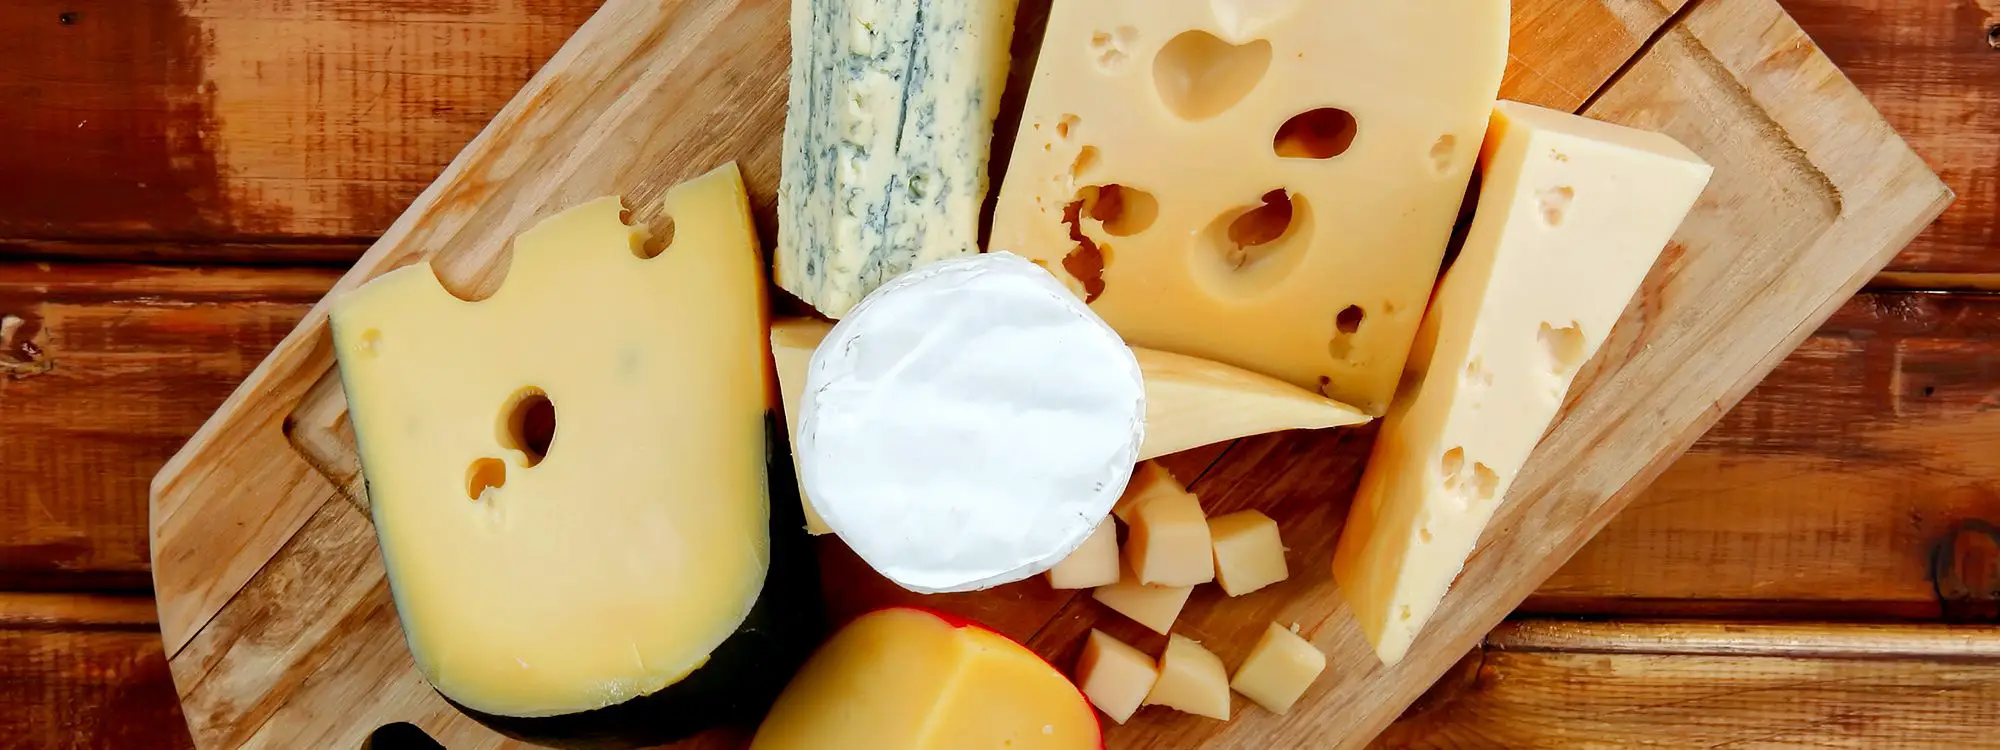 Does Cheese Have Protein?